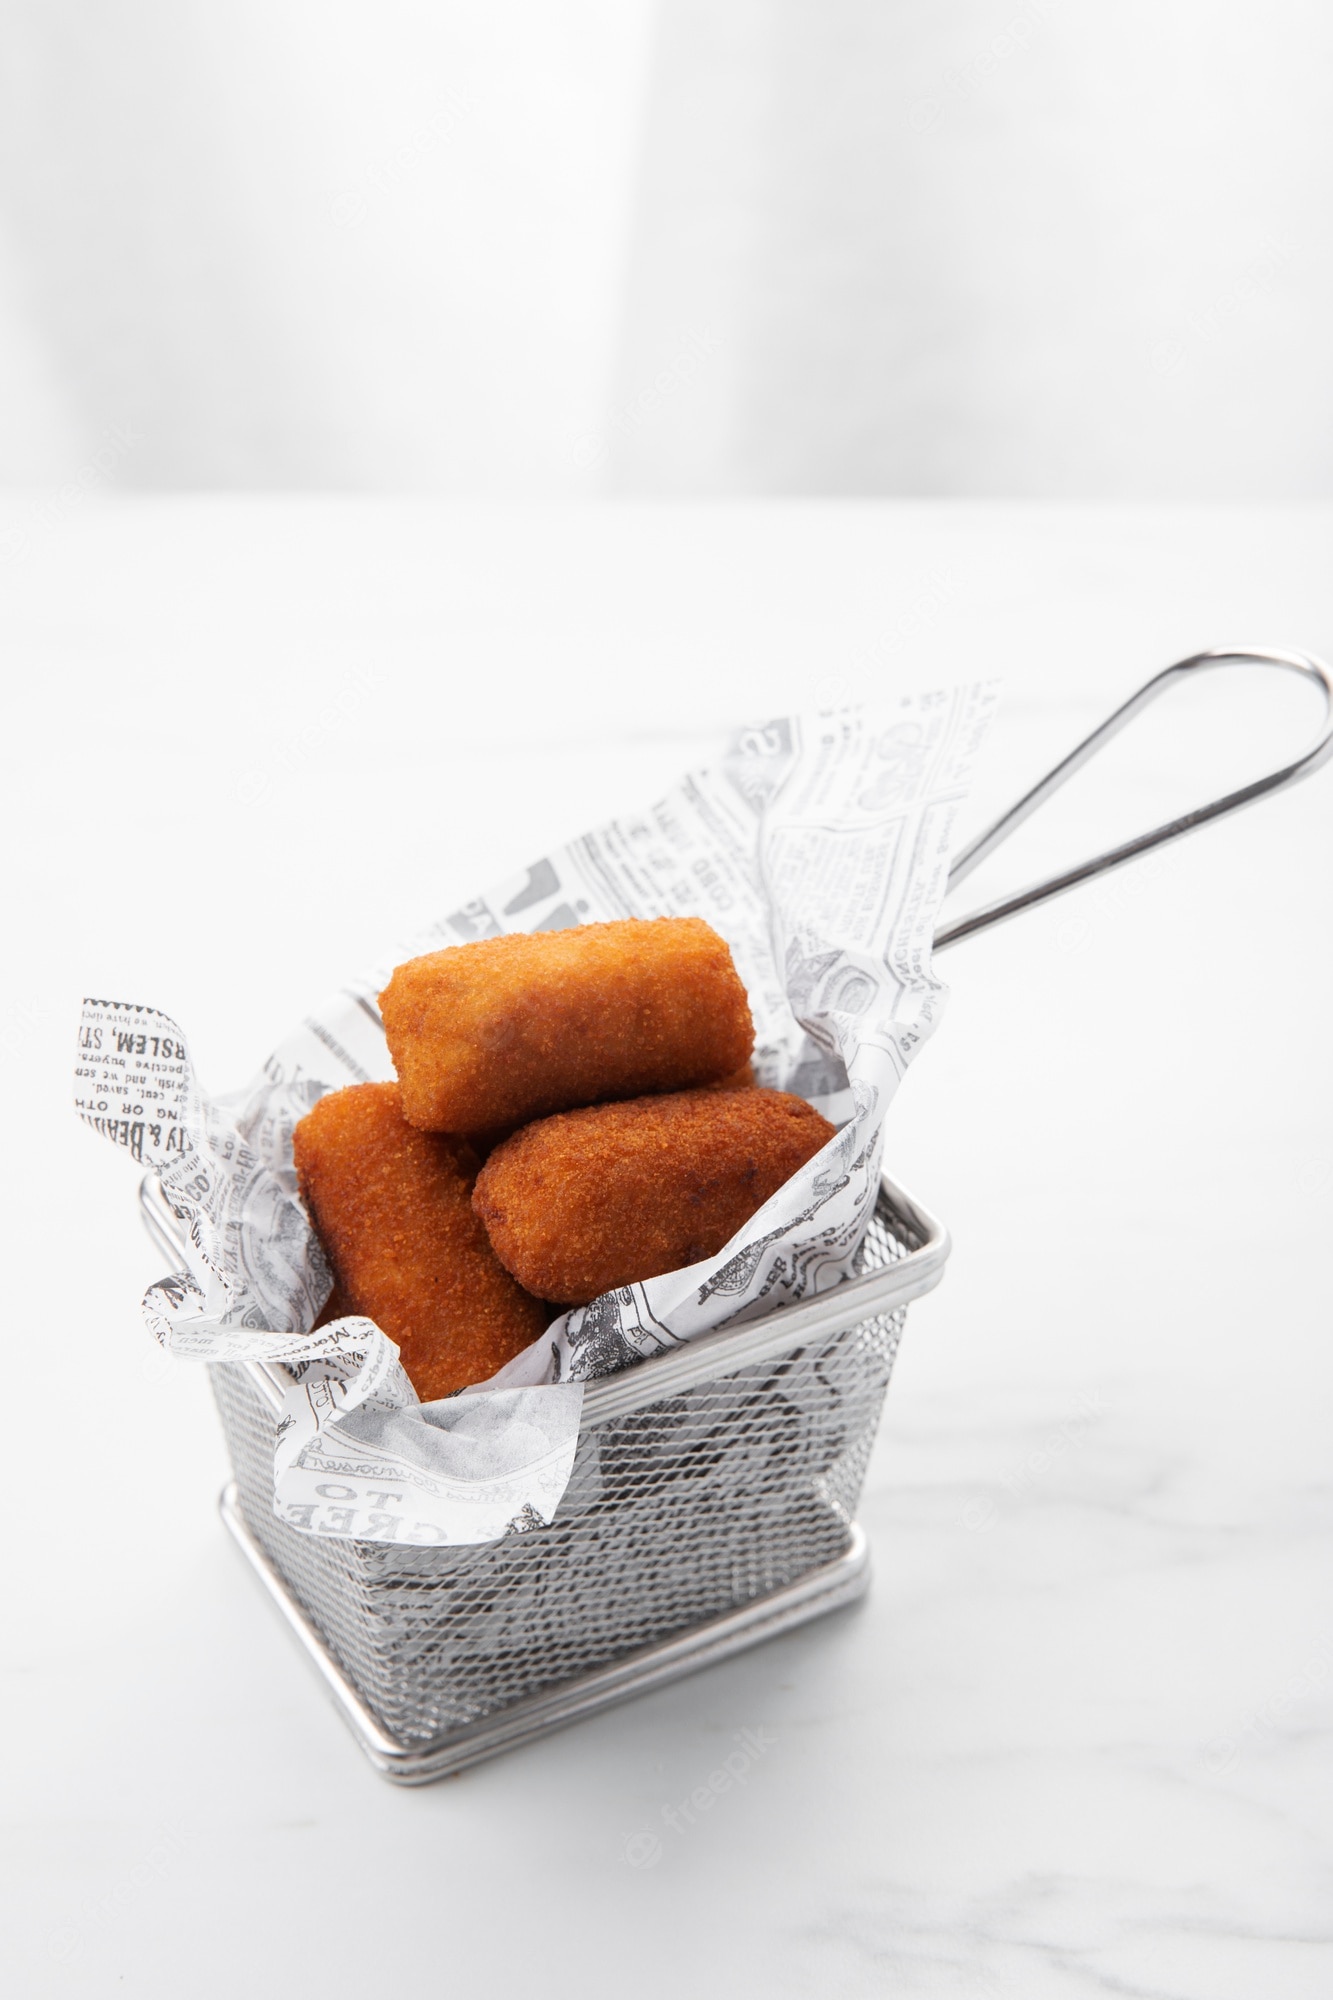 Croquette Wallpapers